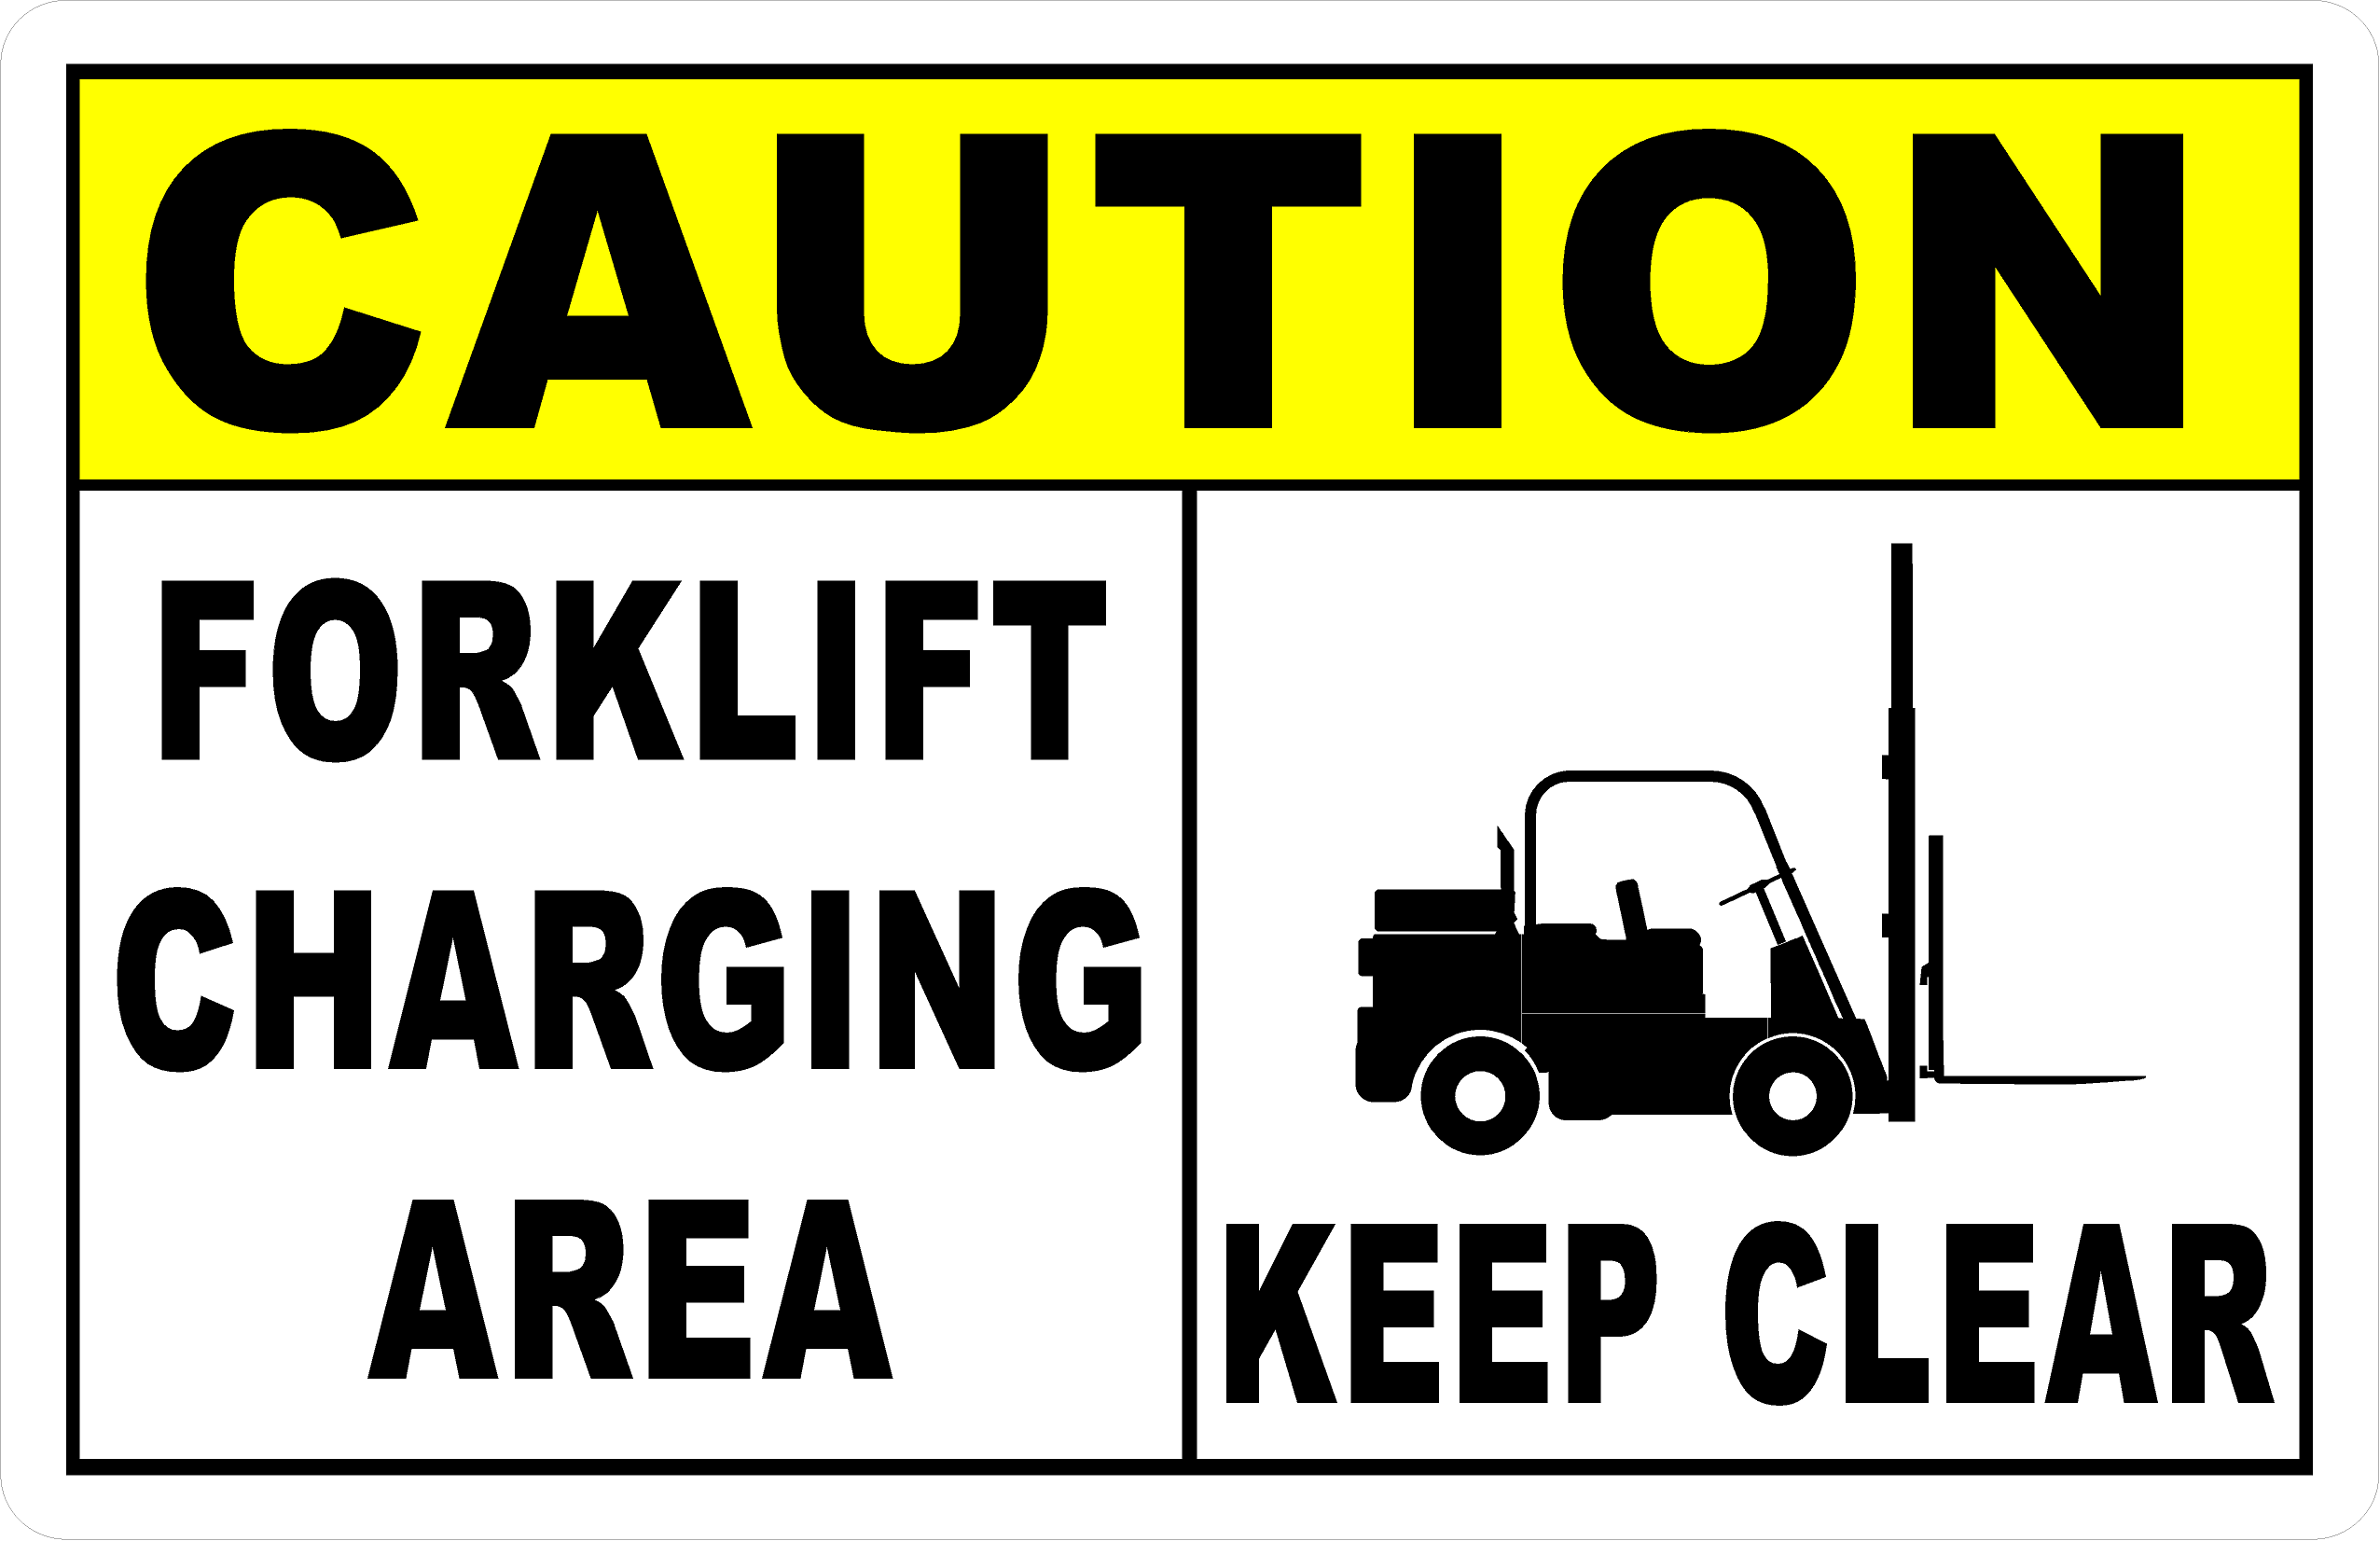 Caution Forklift Charging Area Keep Clear Sign – Signs by SalaGraphics